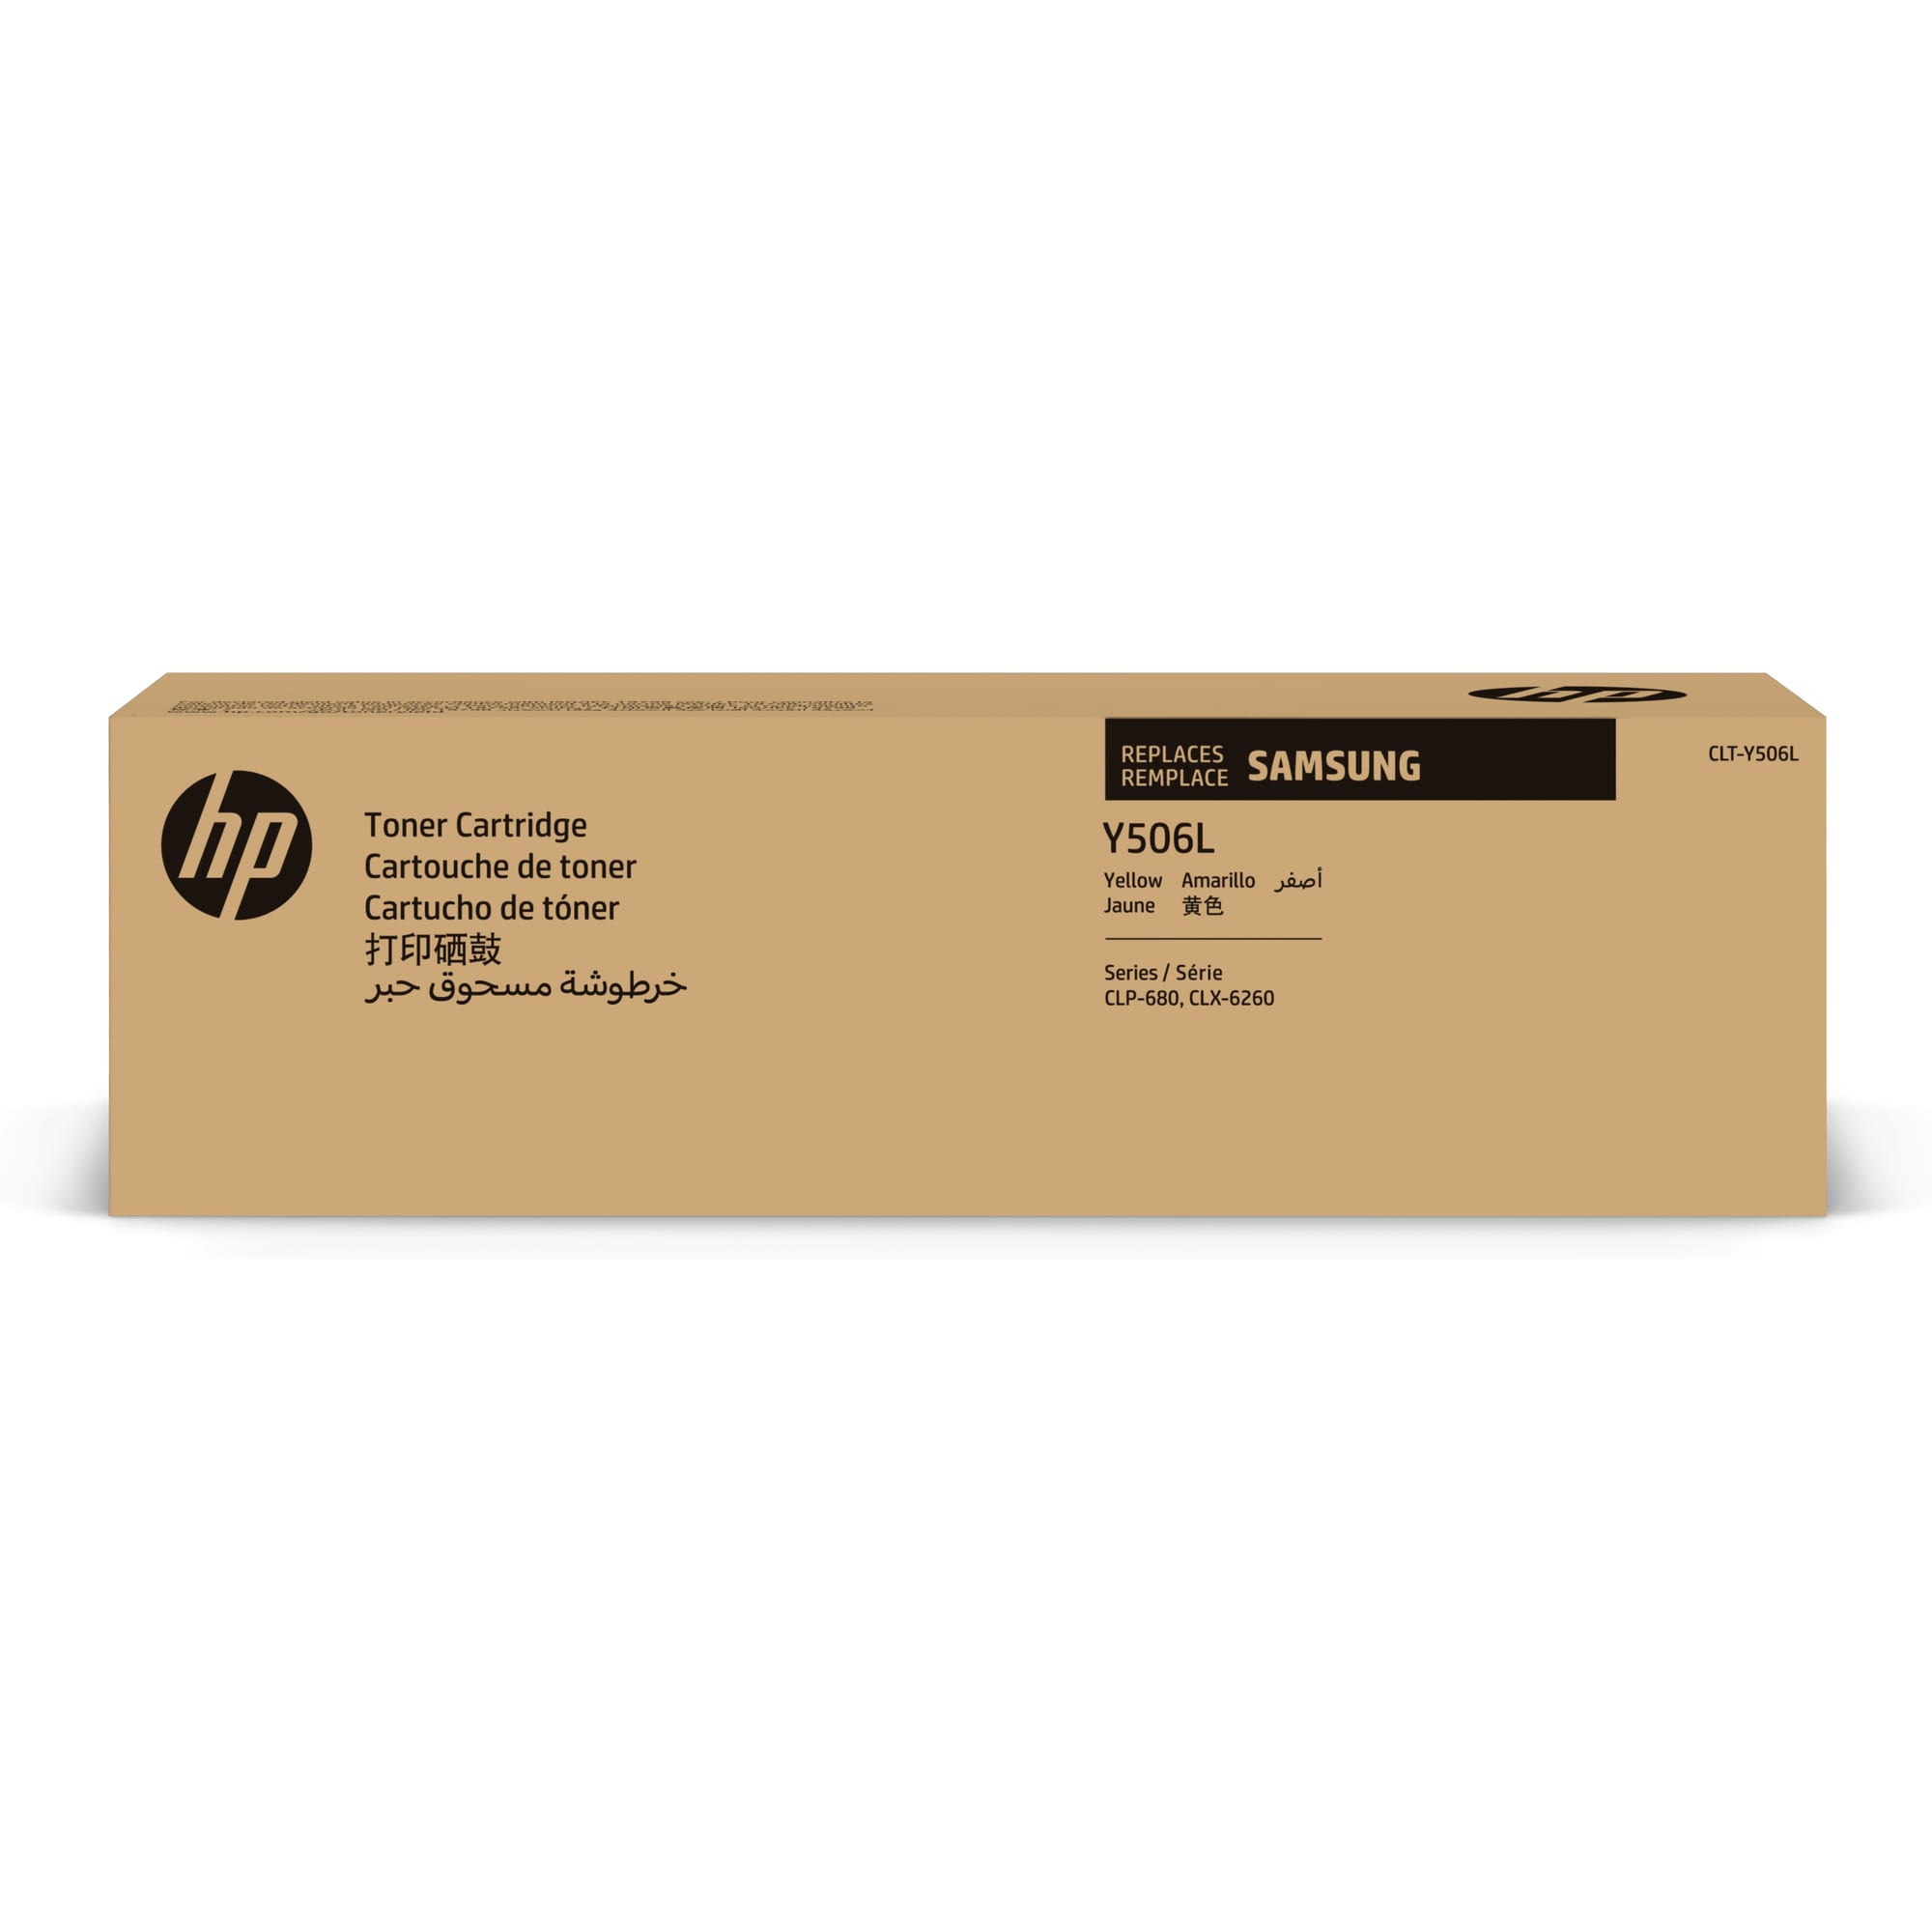 HP - Samsung CLT-Y506L High Yield Yellow Toner Cartridge (3, 500 pages)0 